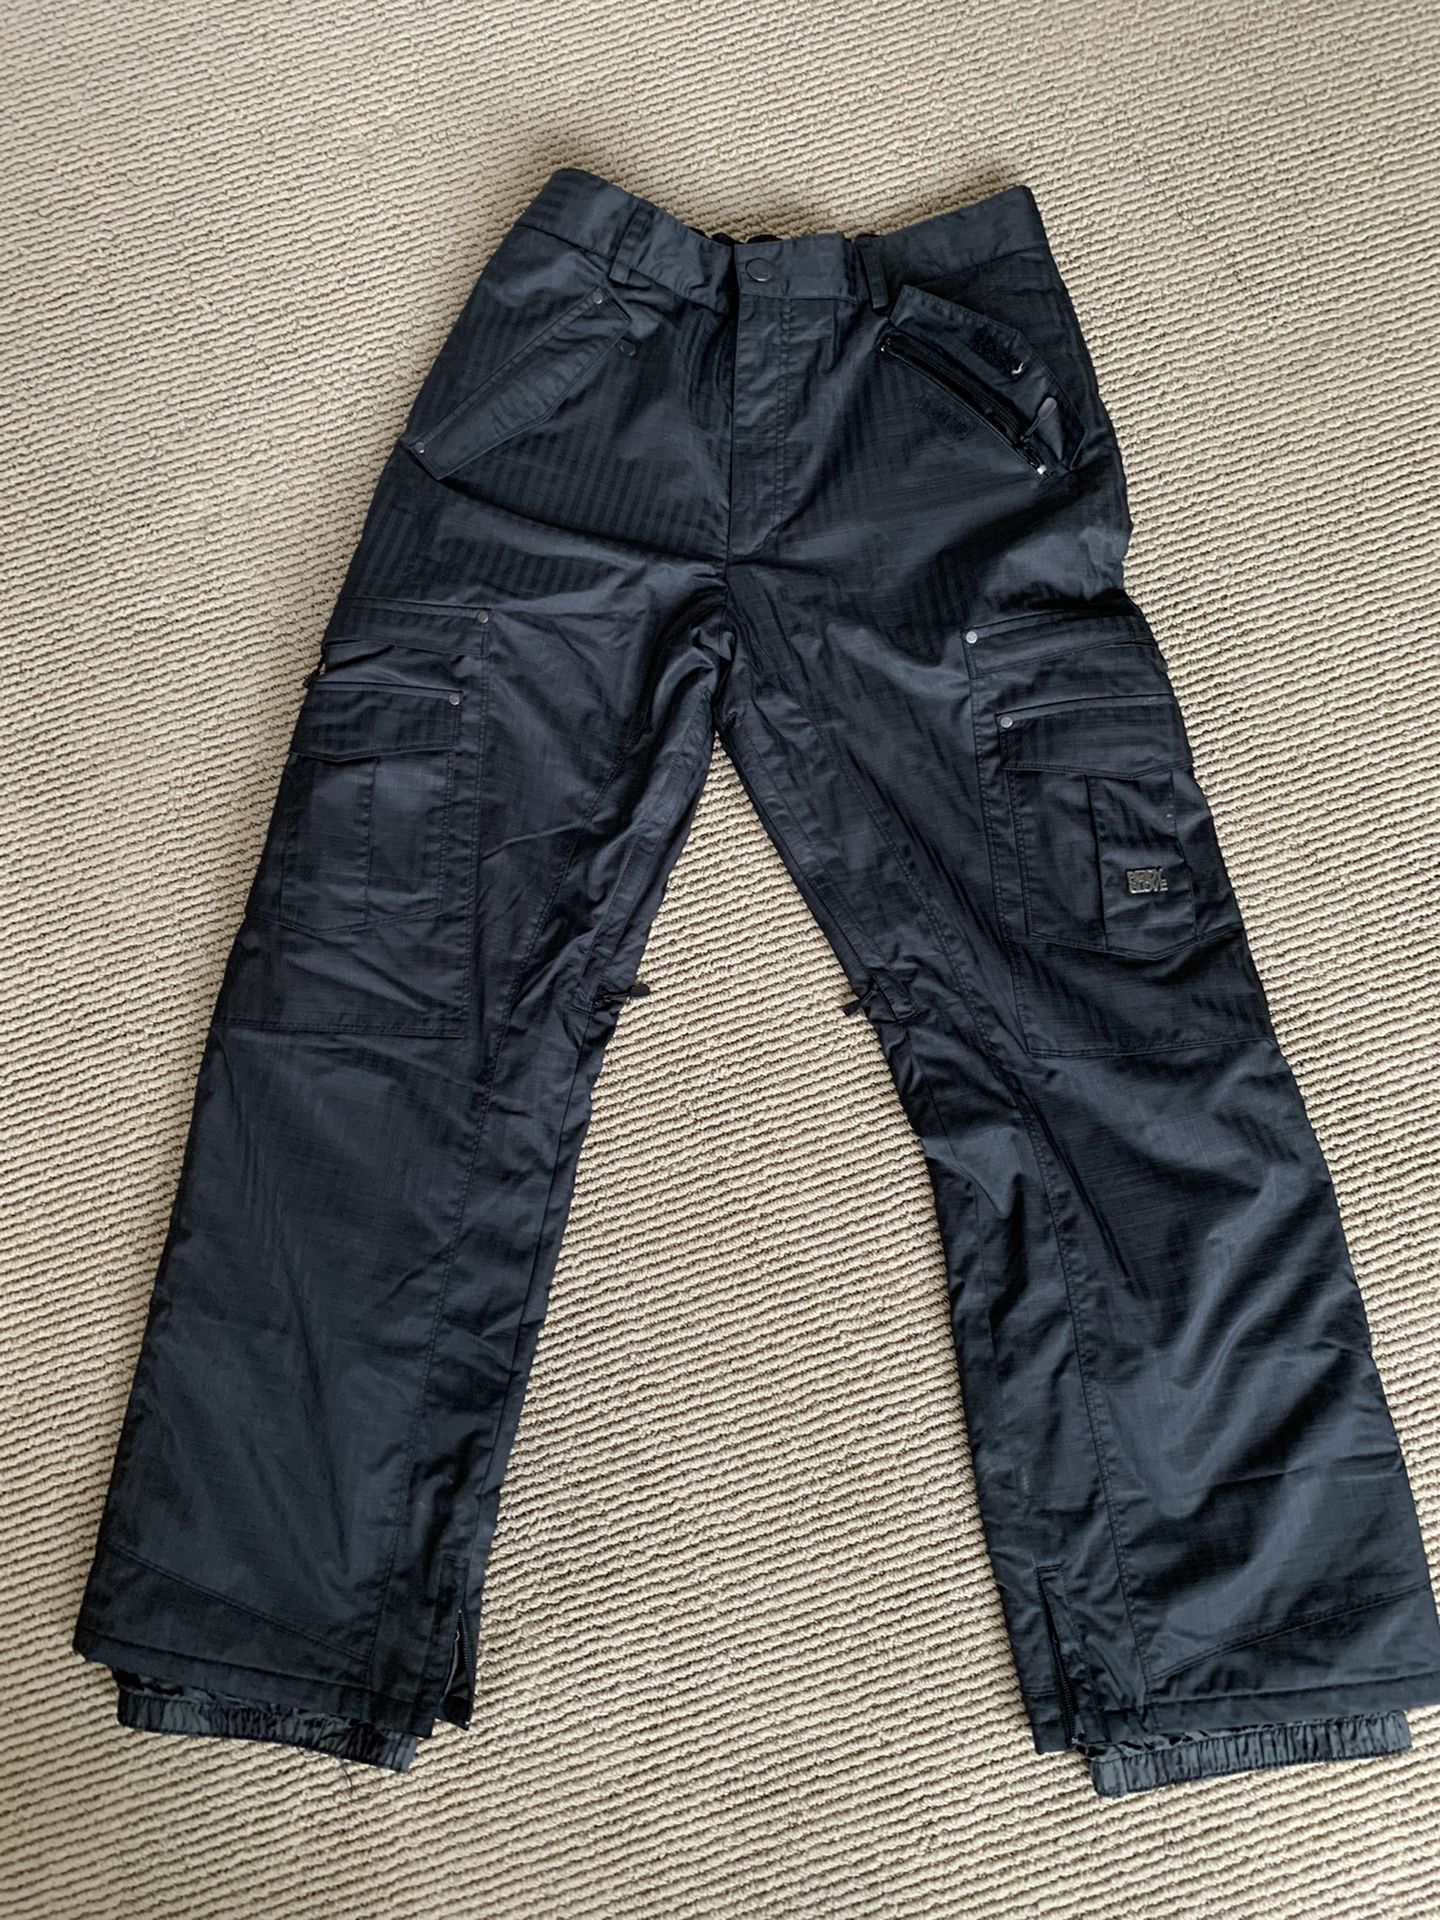 Body Glove Insulated Snow Pants XL